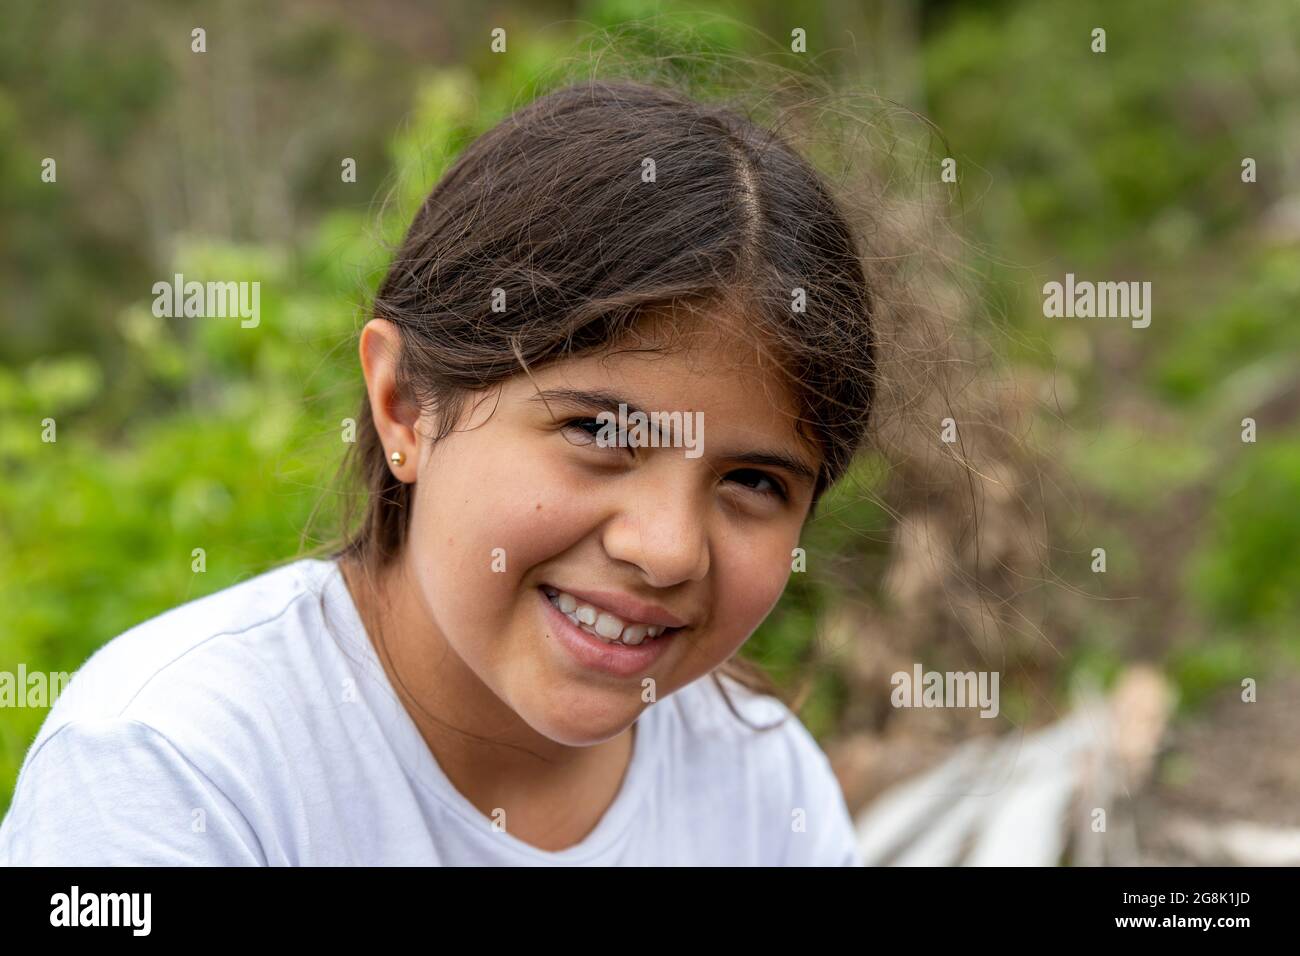 portrait of a tousled latina girl smiling looking at the camera Stock Photo